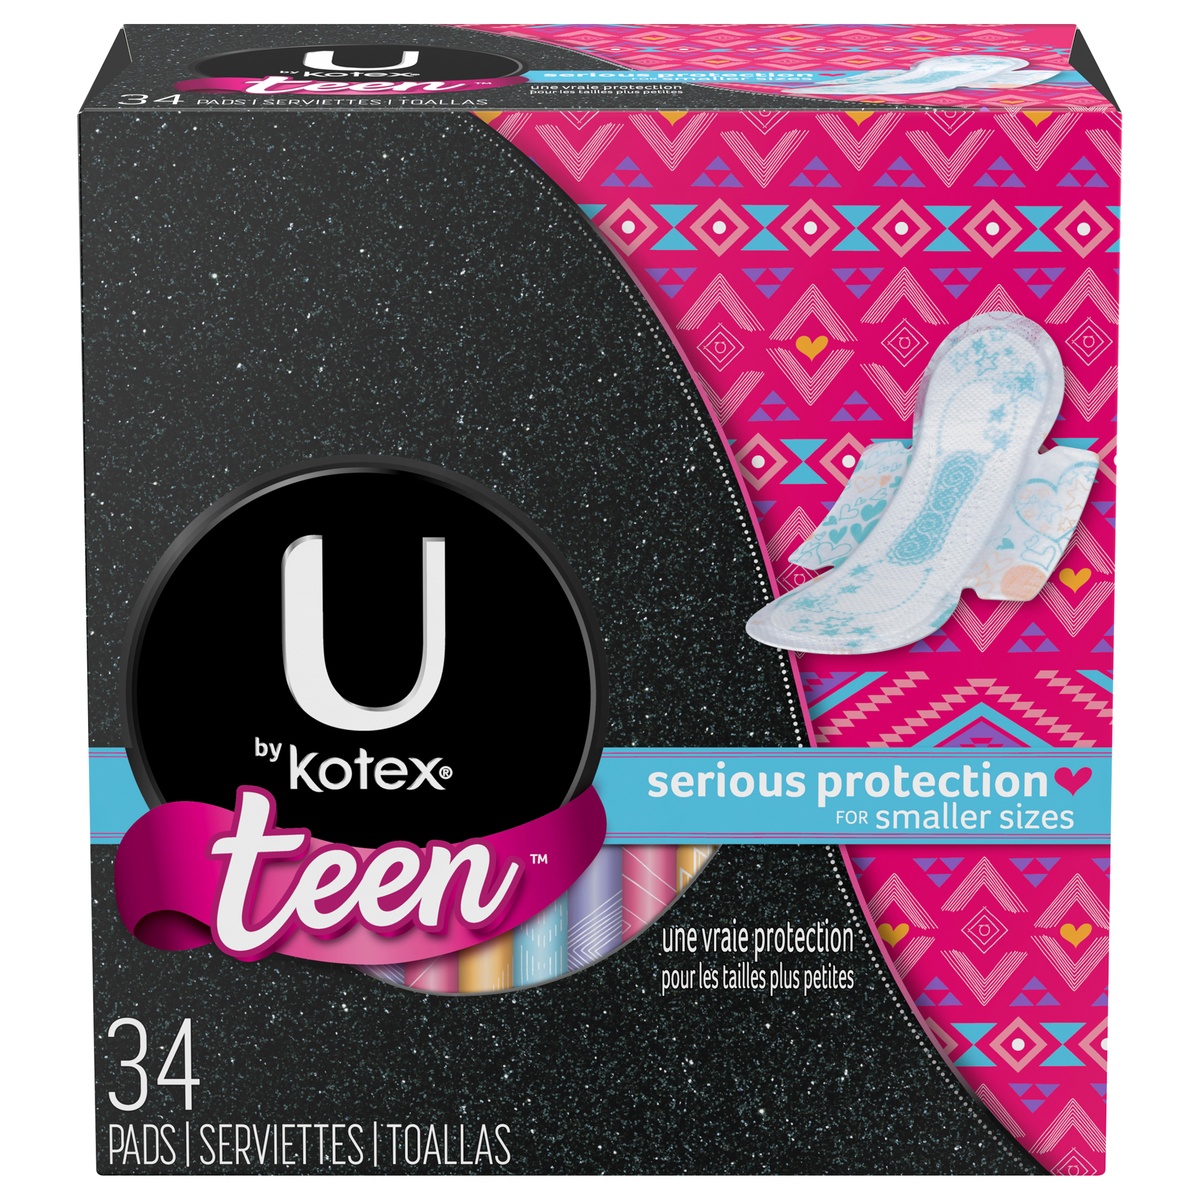 slide 1 of 3, Kotex Teen Serious Protection Pads, 34 ct